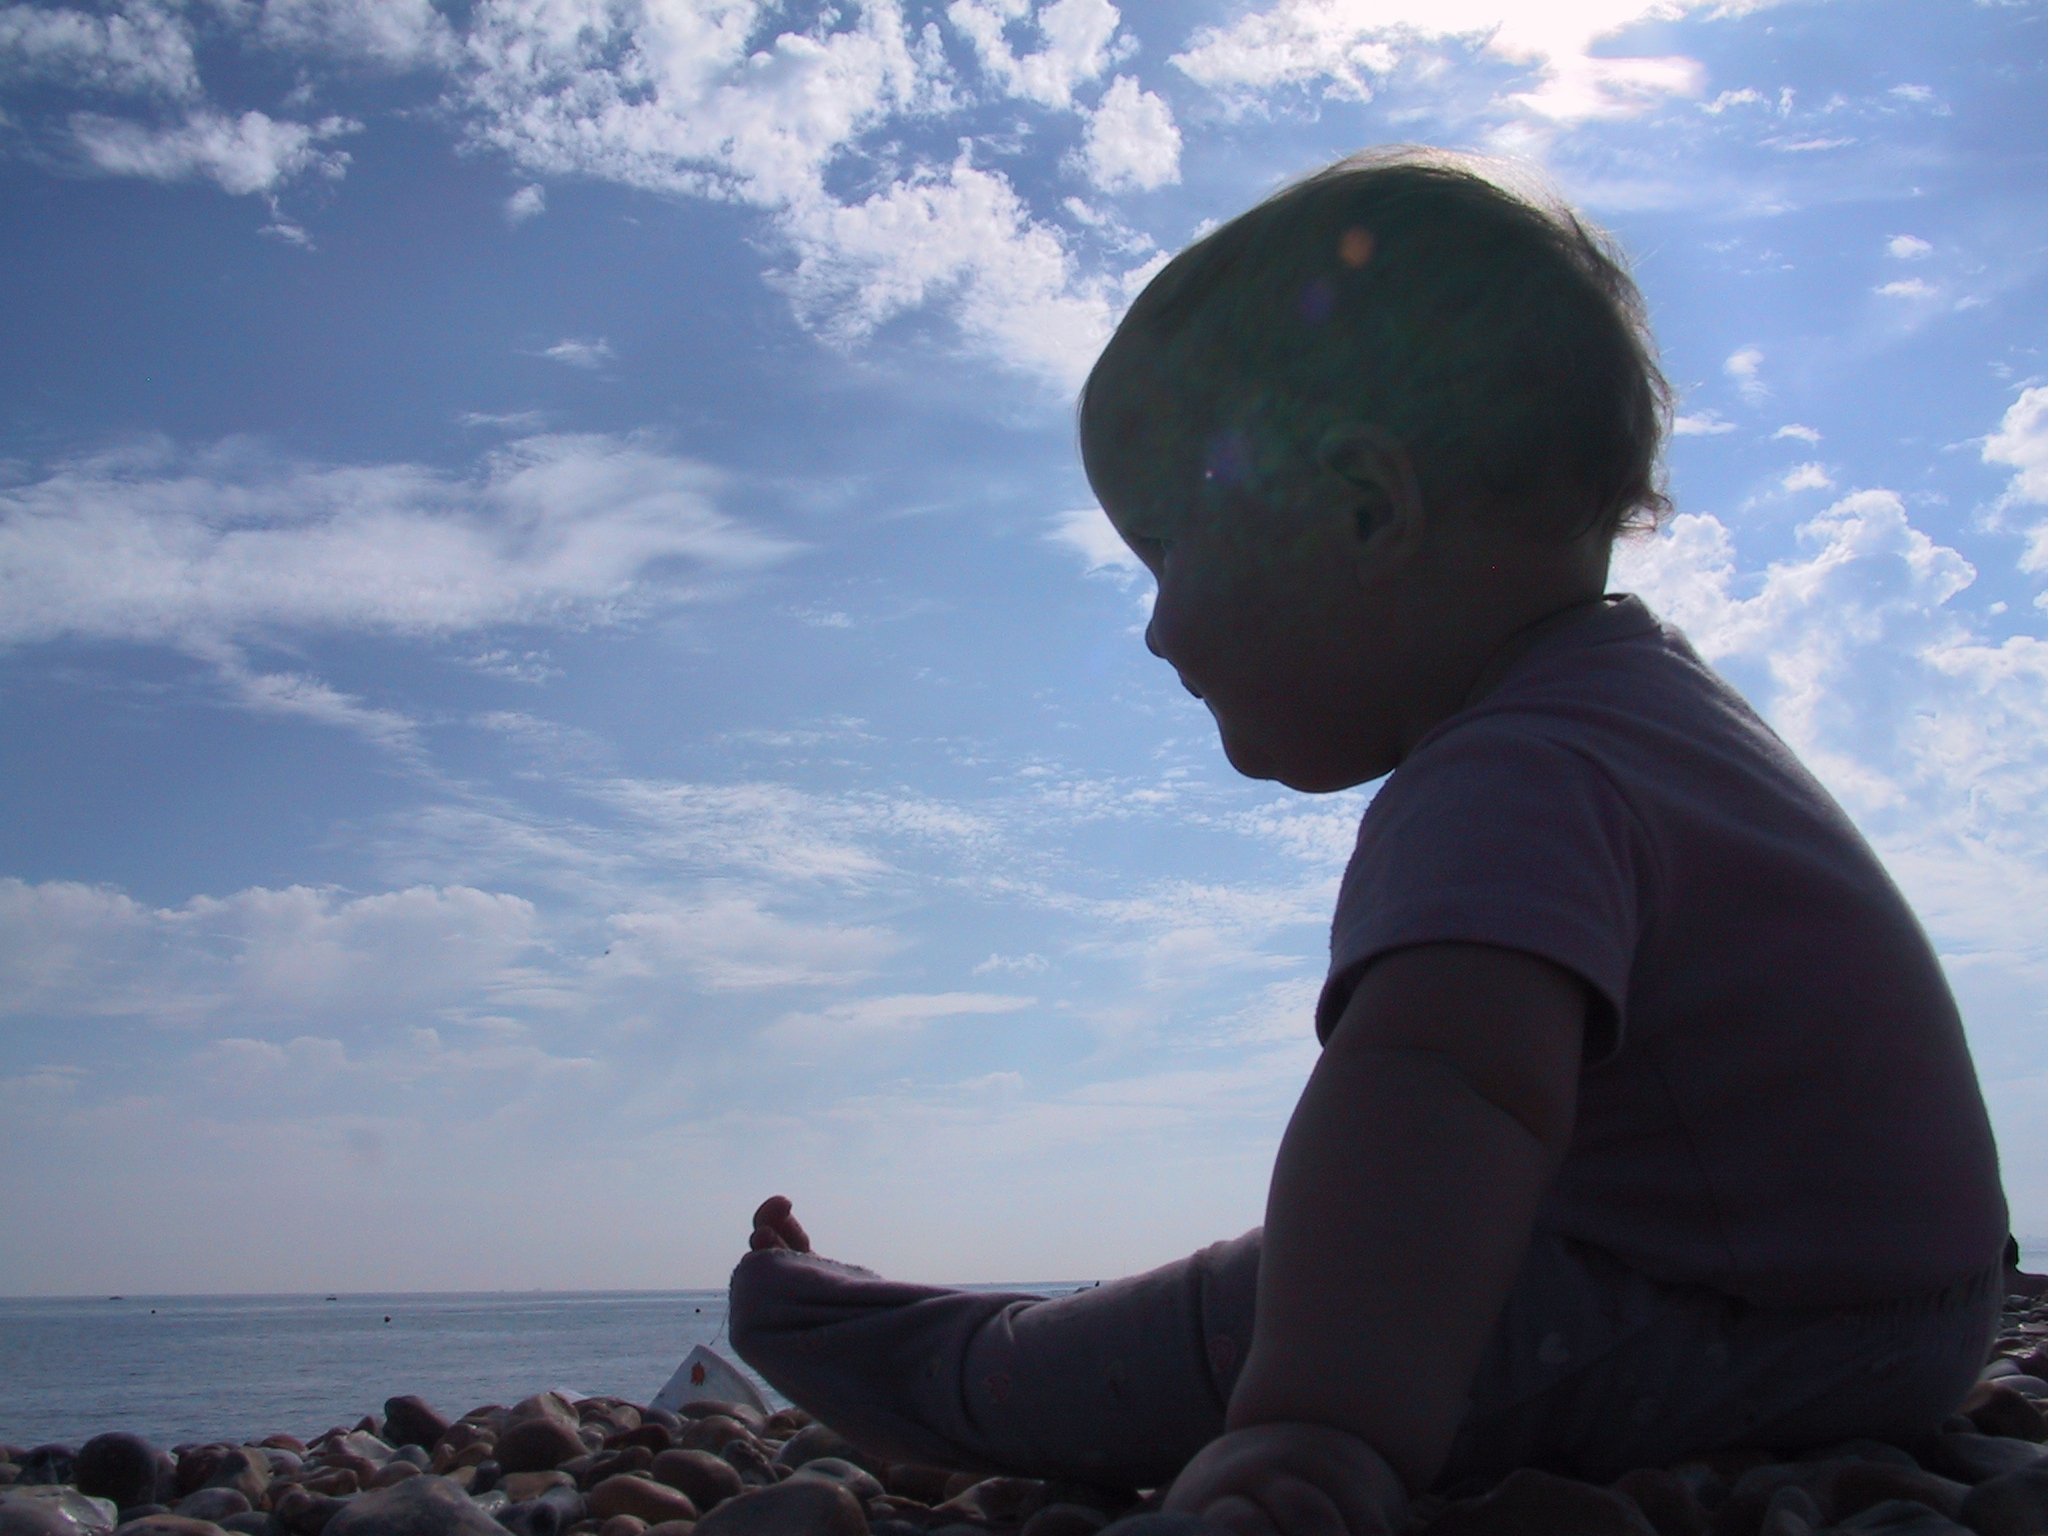 a young child sitting on a beach looking at the water